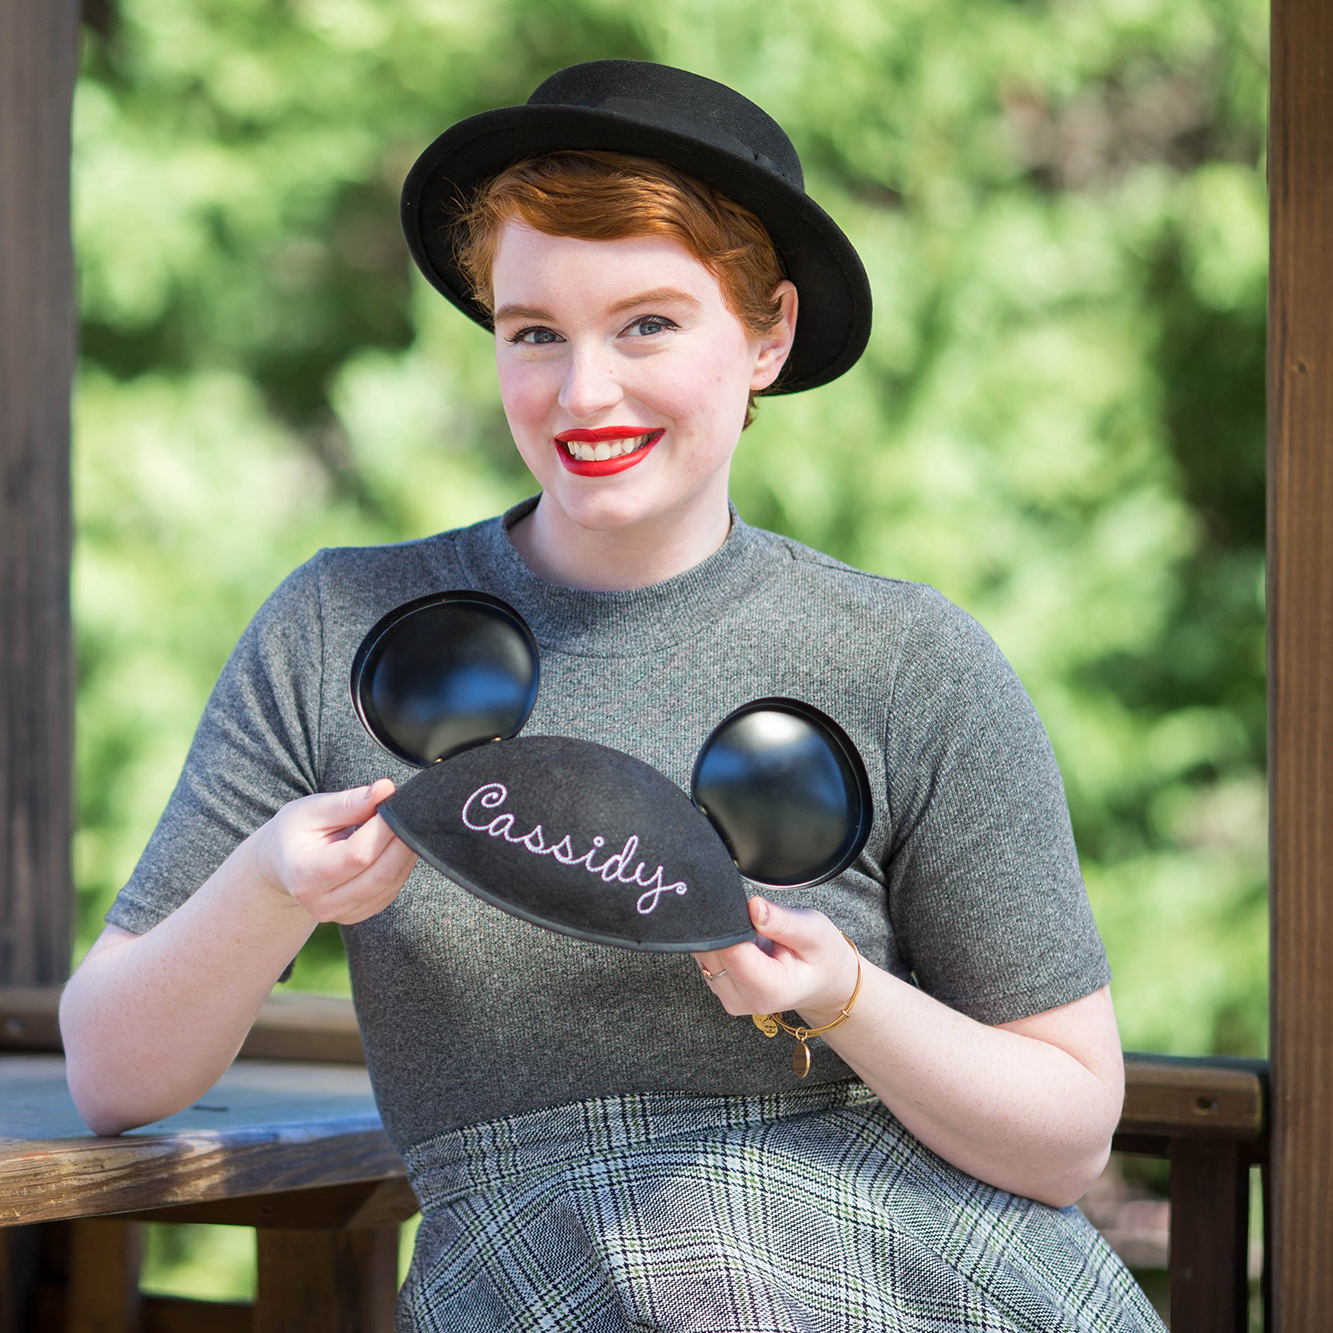 Cassidy with a disney cap in her hand